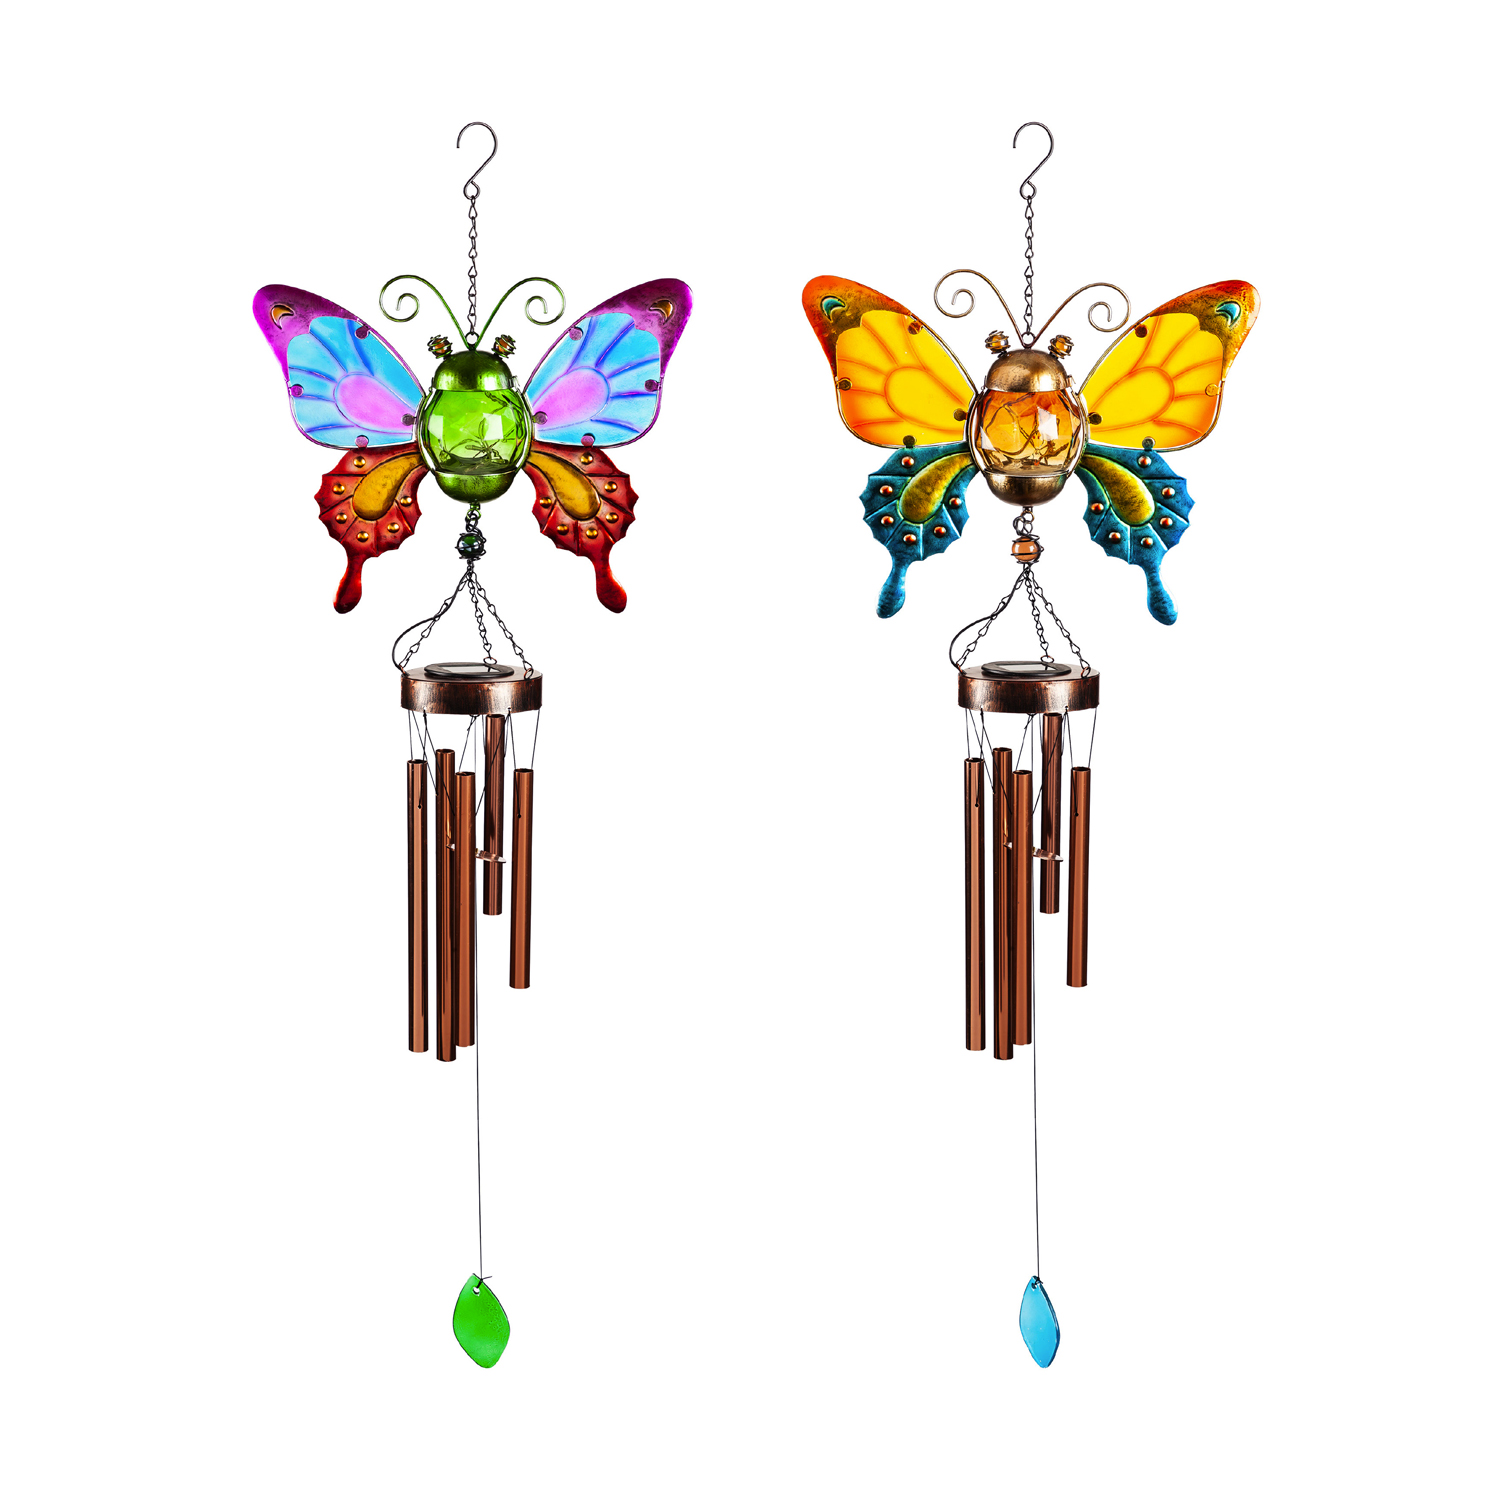 Evergreen Twinkling Light Solar Glass and Metal Butterfly Wind Chime, 2 ASST., 13.4'' x 4.3'' x 43.3'' inches. - image 1 of 3